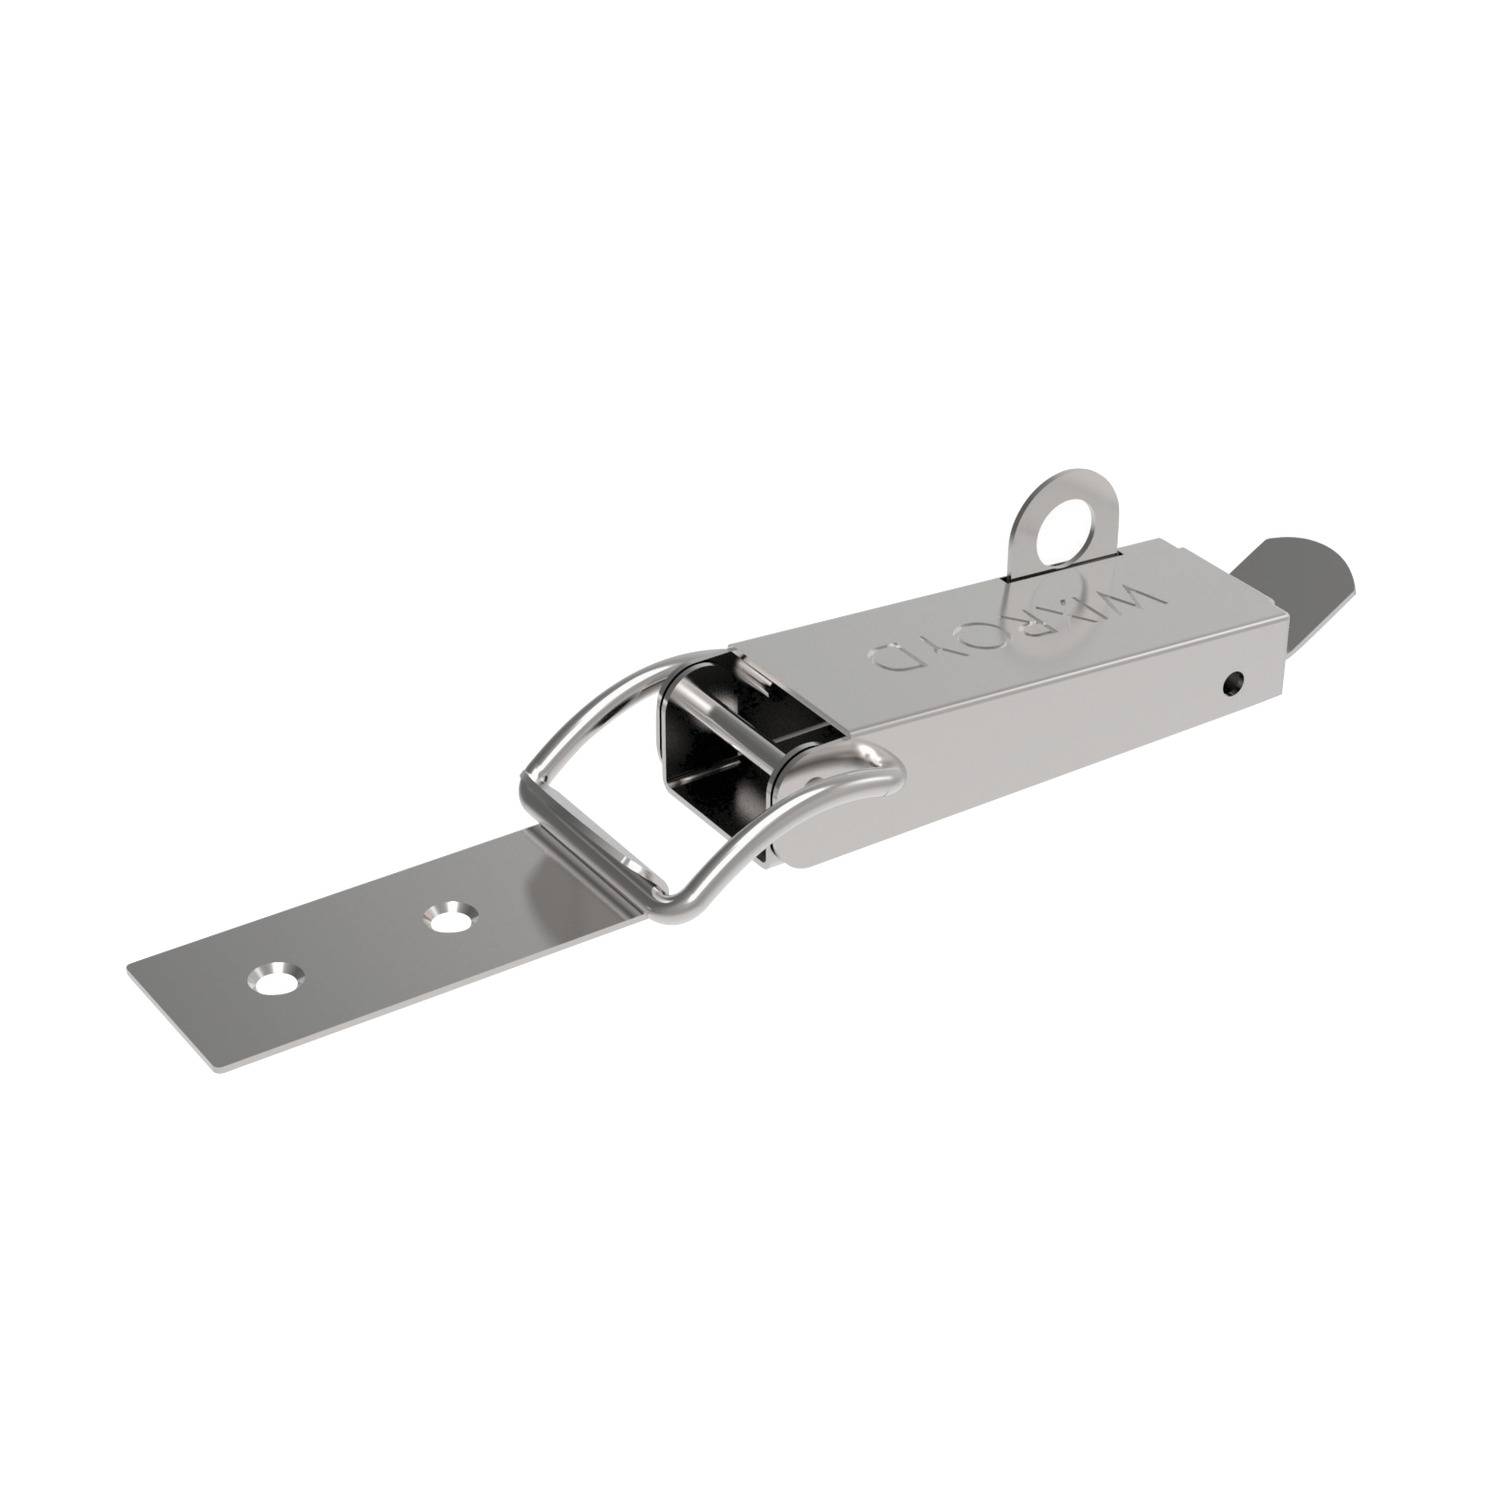 Toggle Latches Toggle latches with padlock shackle. Overall length of 193.5mm. Supplied with counter strike.